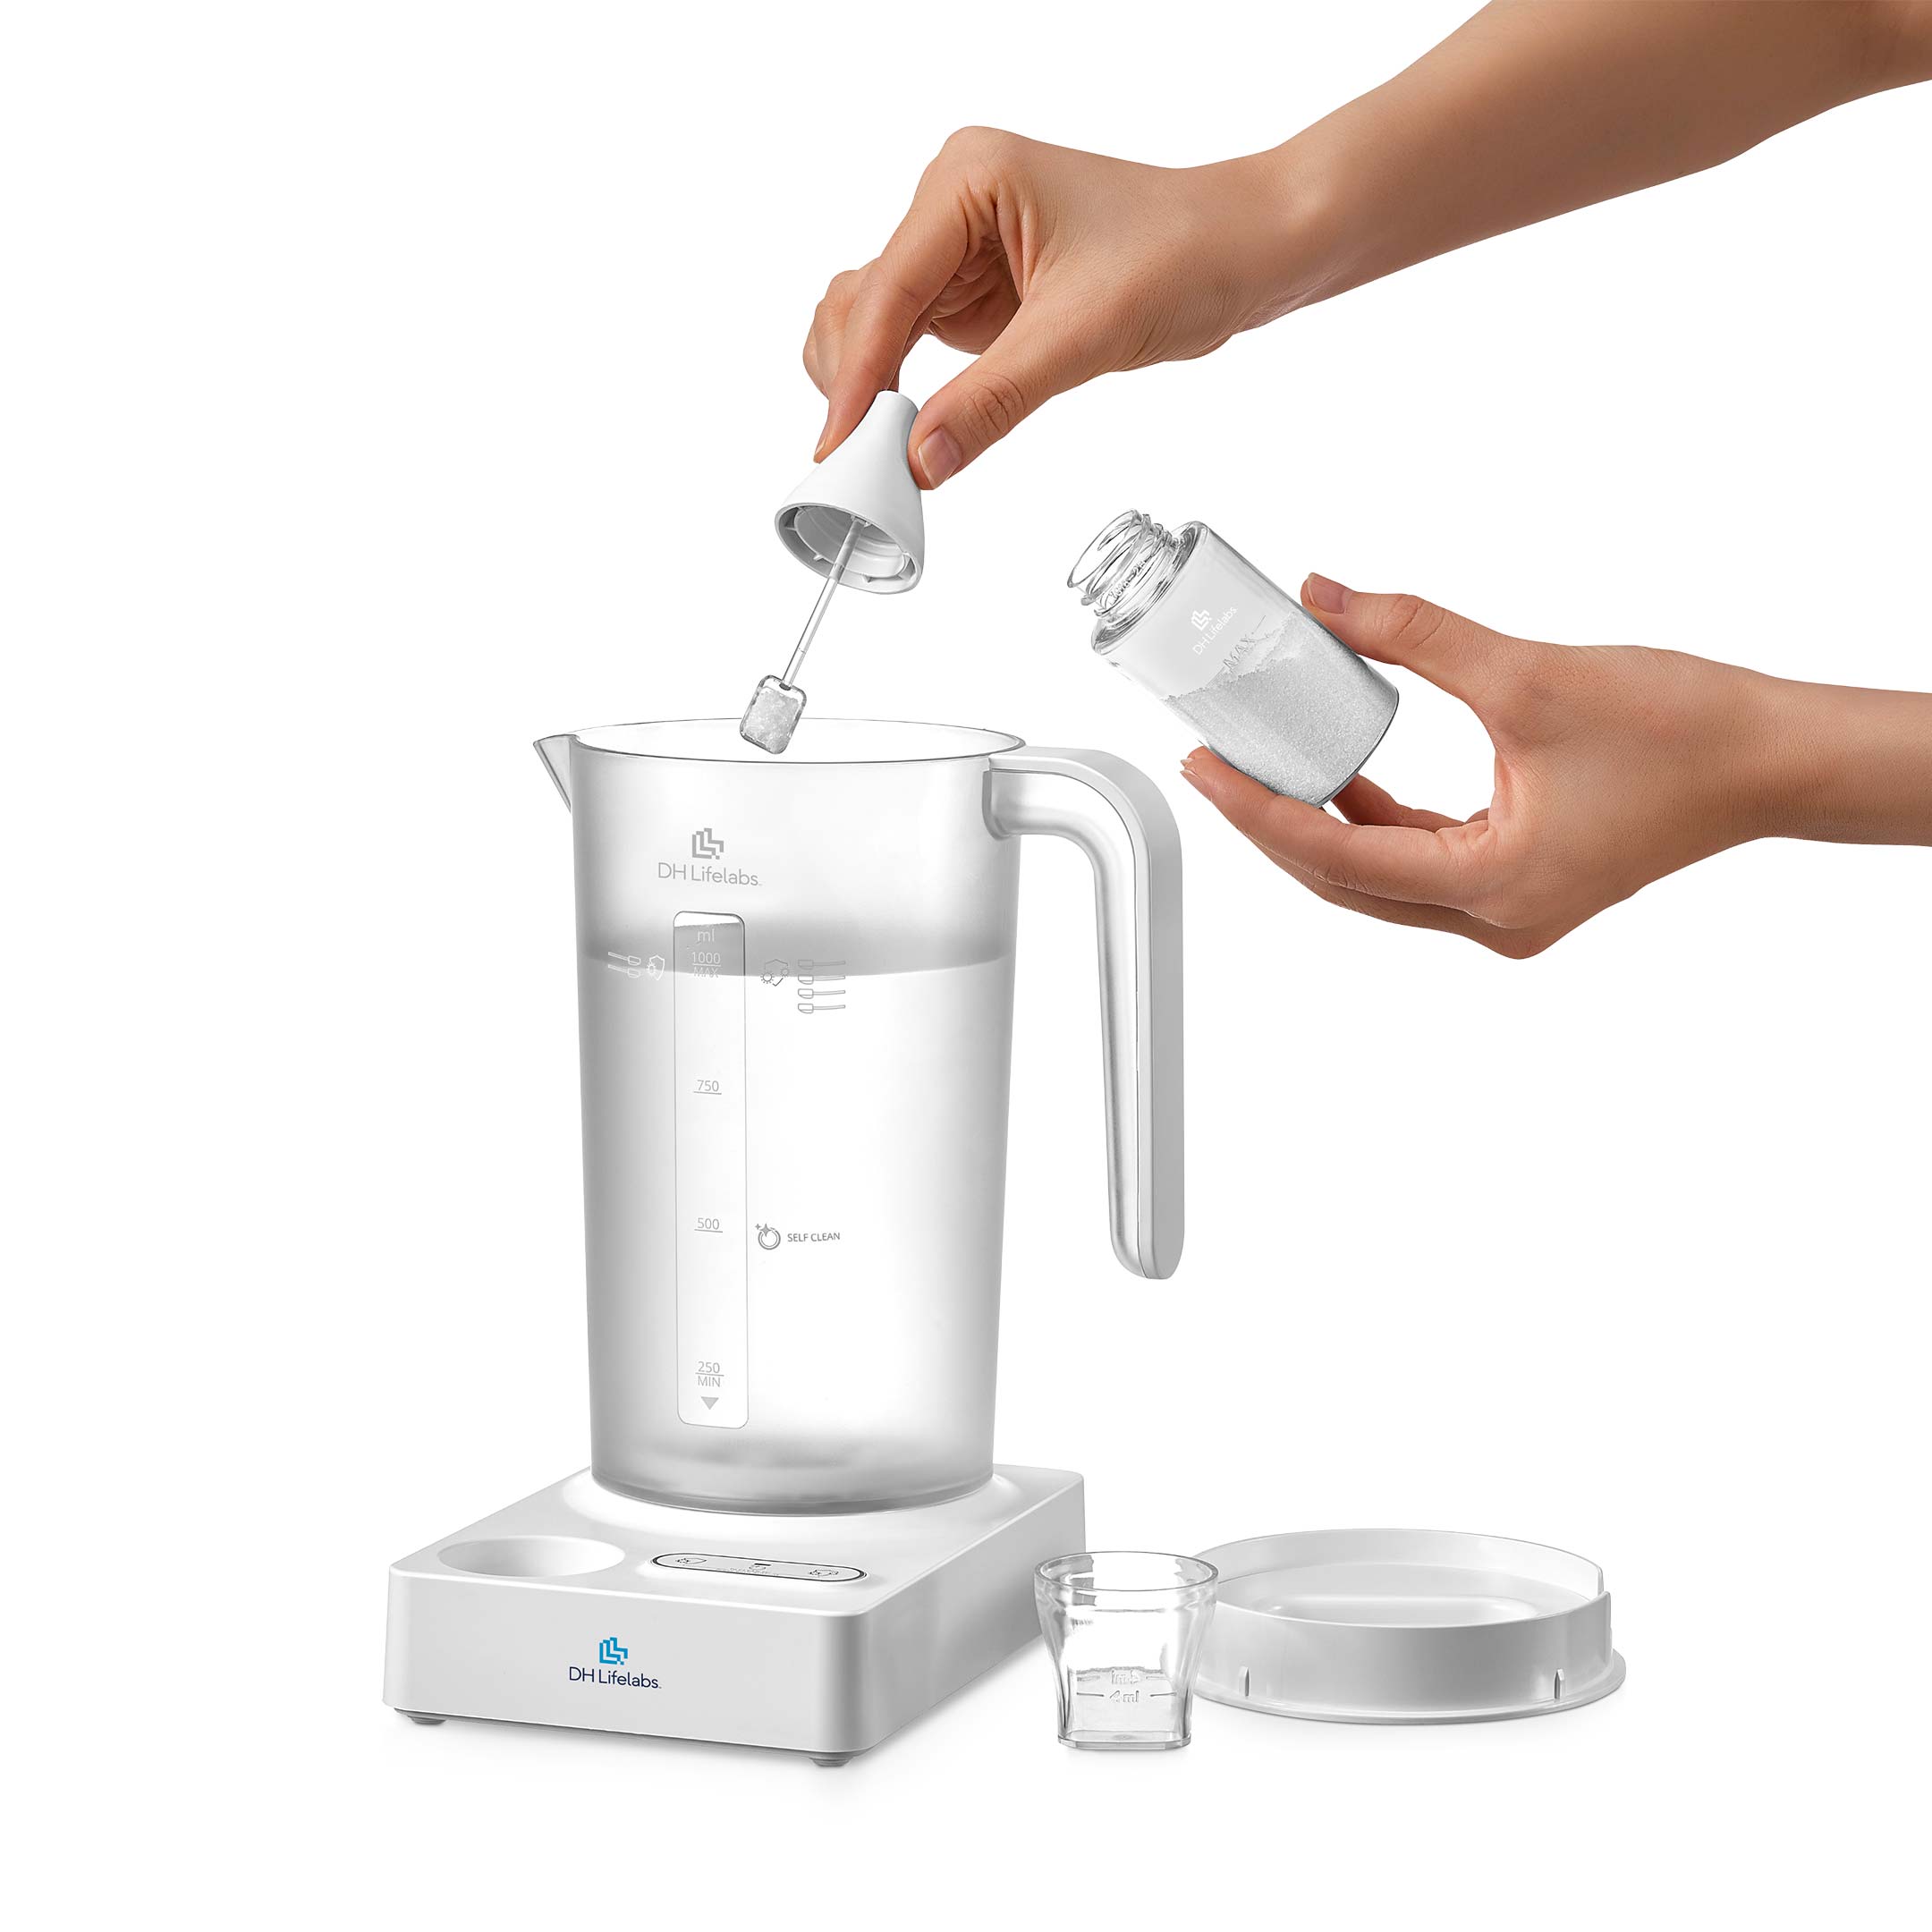 Aaira Surface Multi-purpose Cleaning System